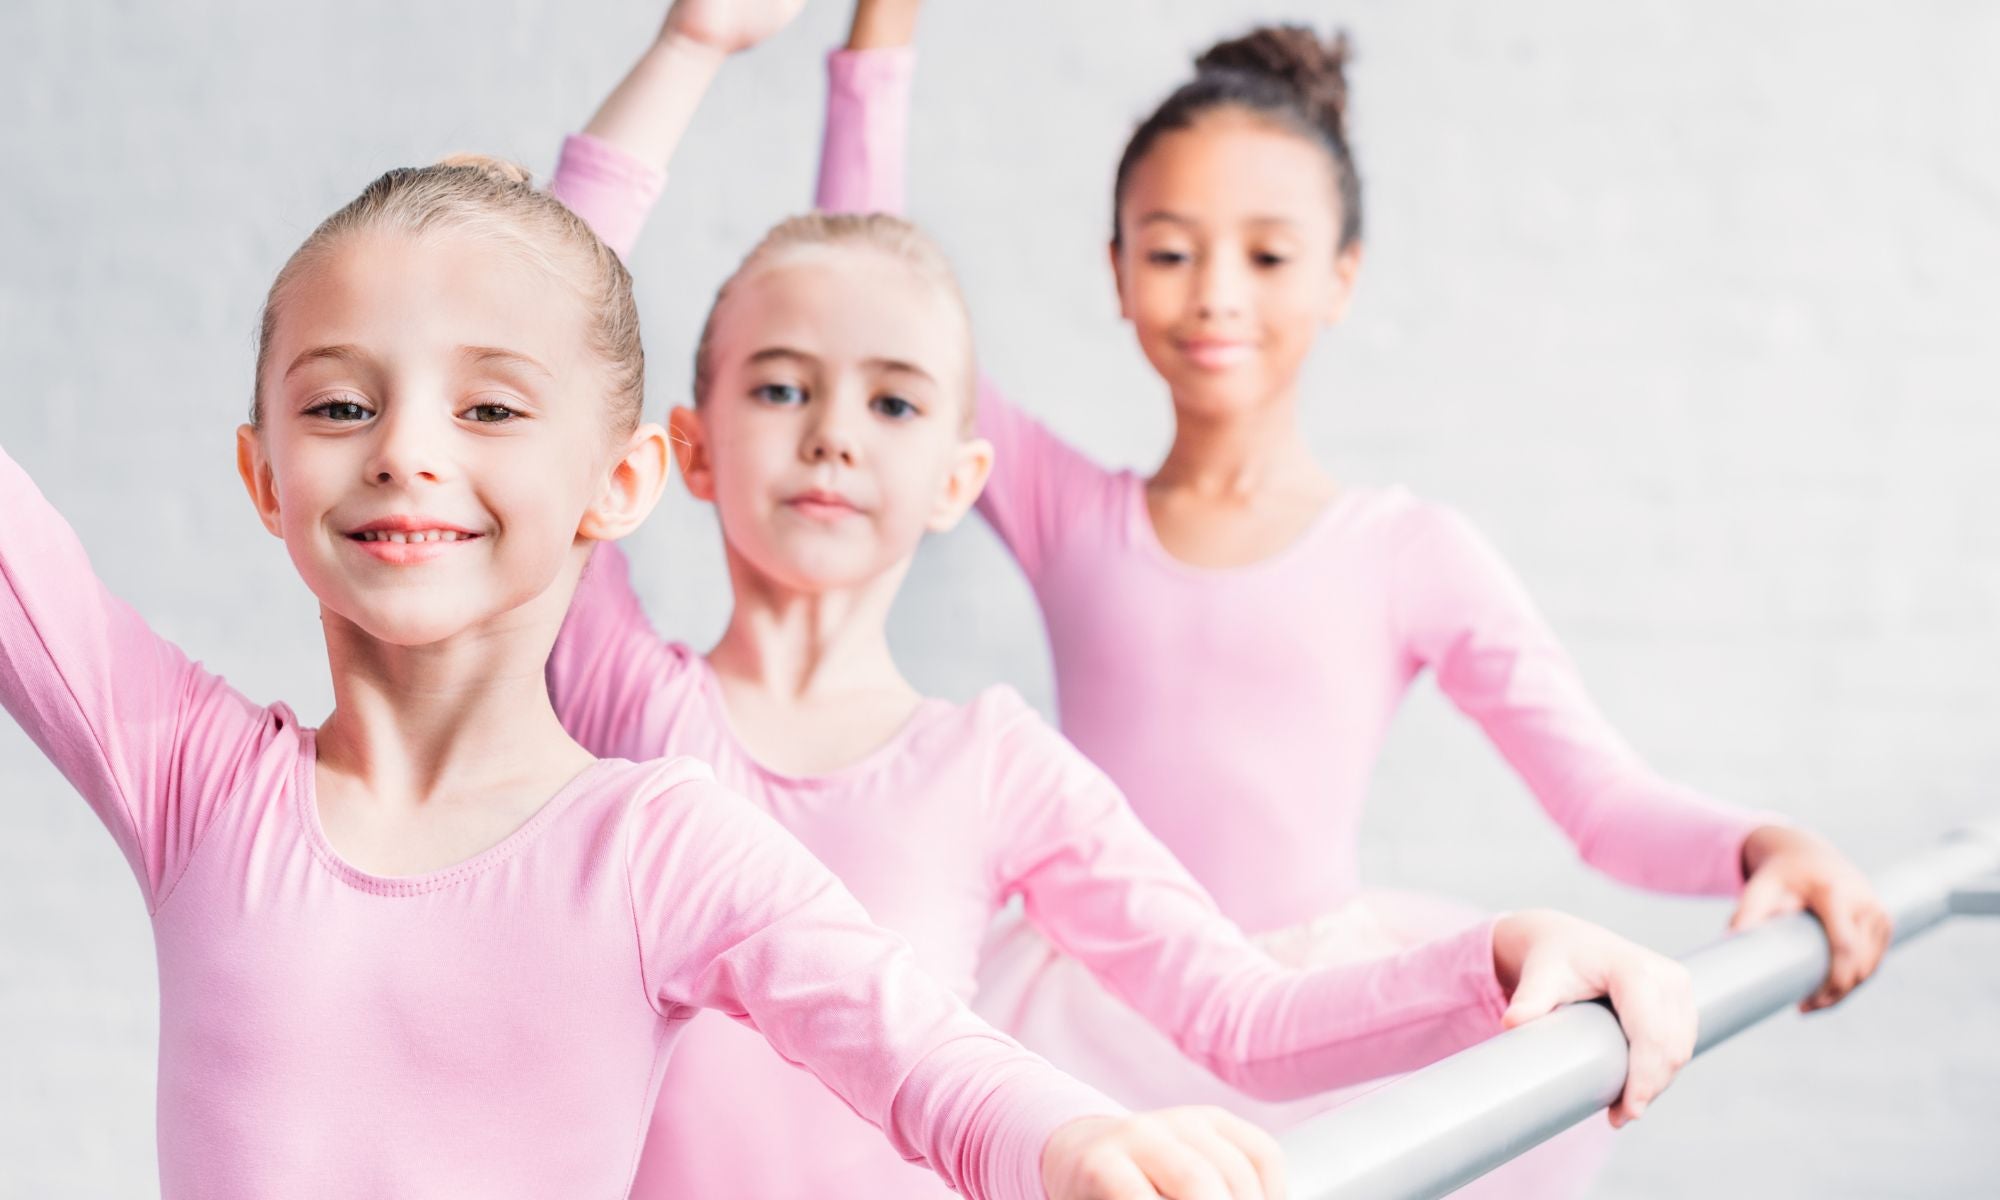 Professional Pointe Shoe Fittings, Ballet Leotards And Dance Shoes – Studio  Dance Wear